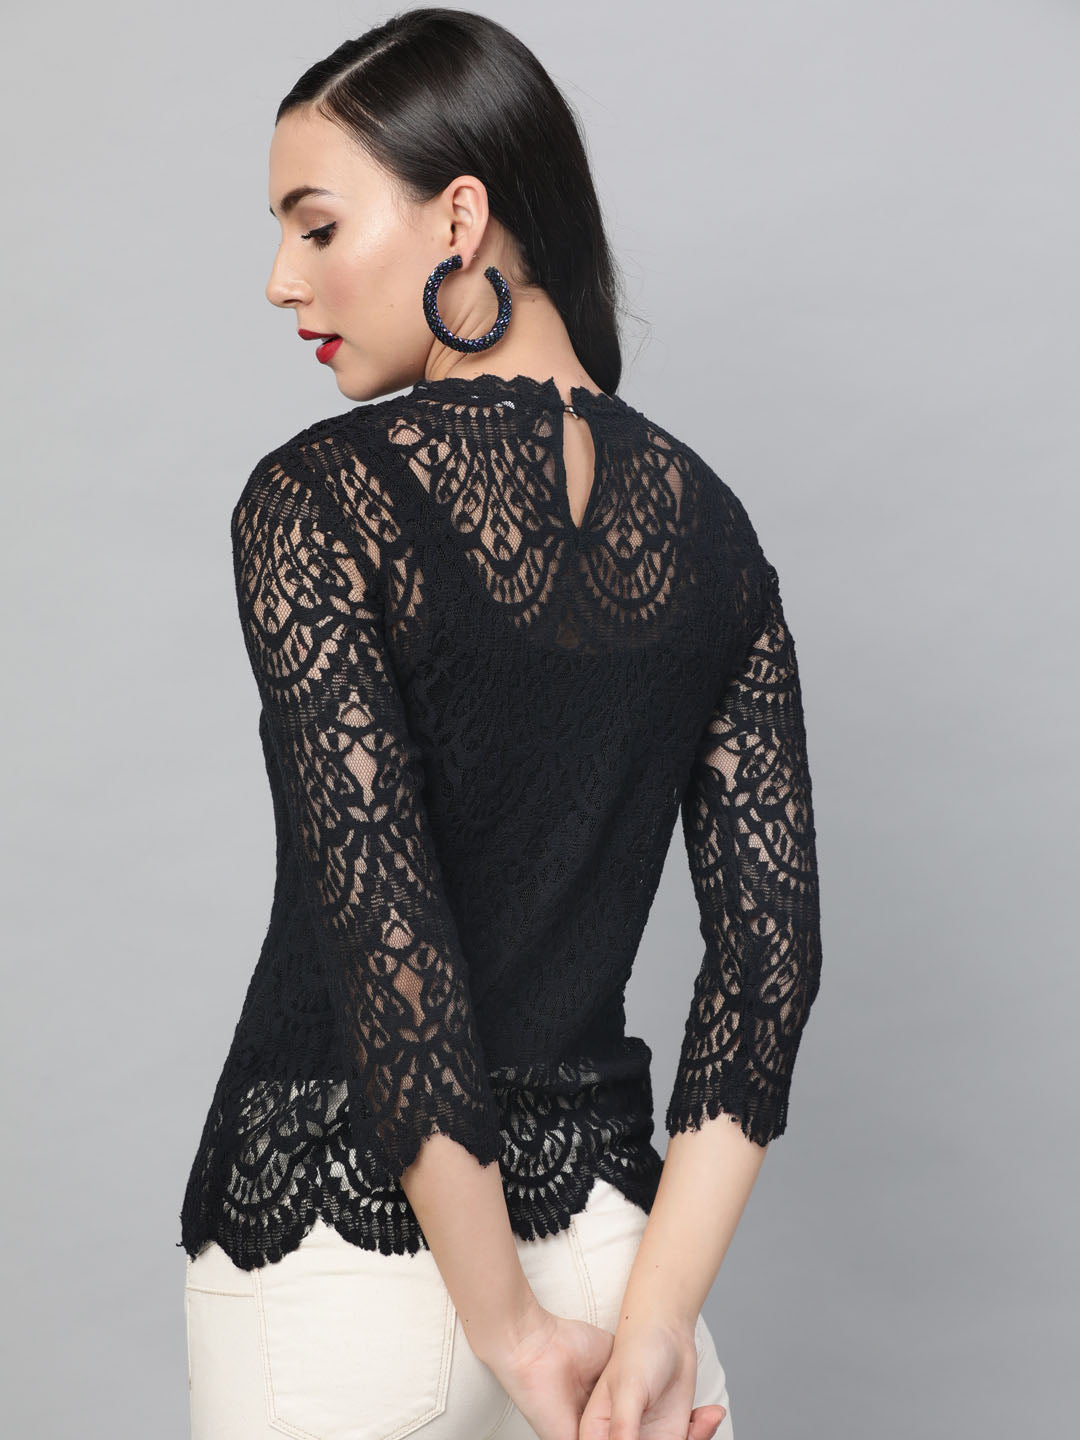 Picture This Black Long Sleeve Lace Top  Lace top long sleeve, Black lace  top long sleeve, Black lace tops